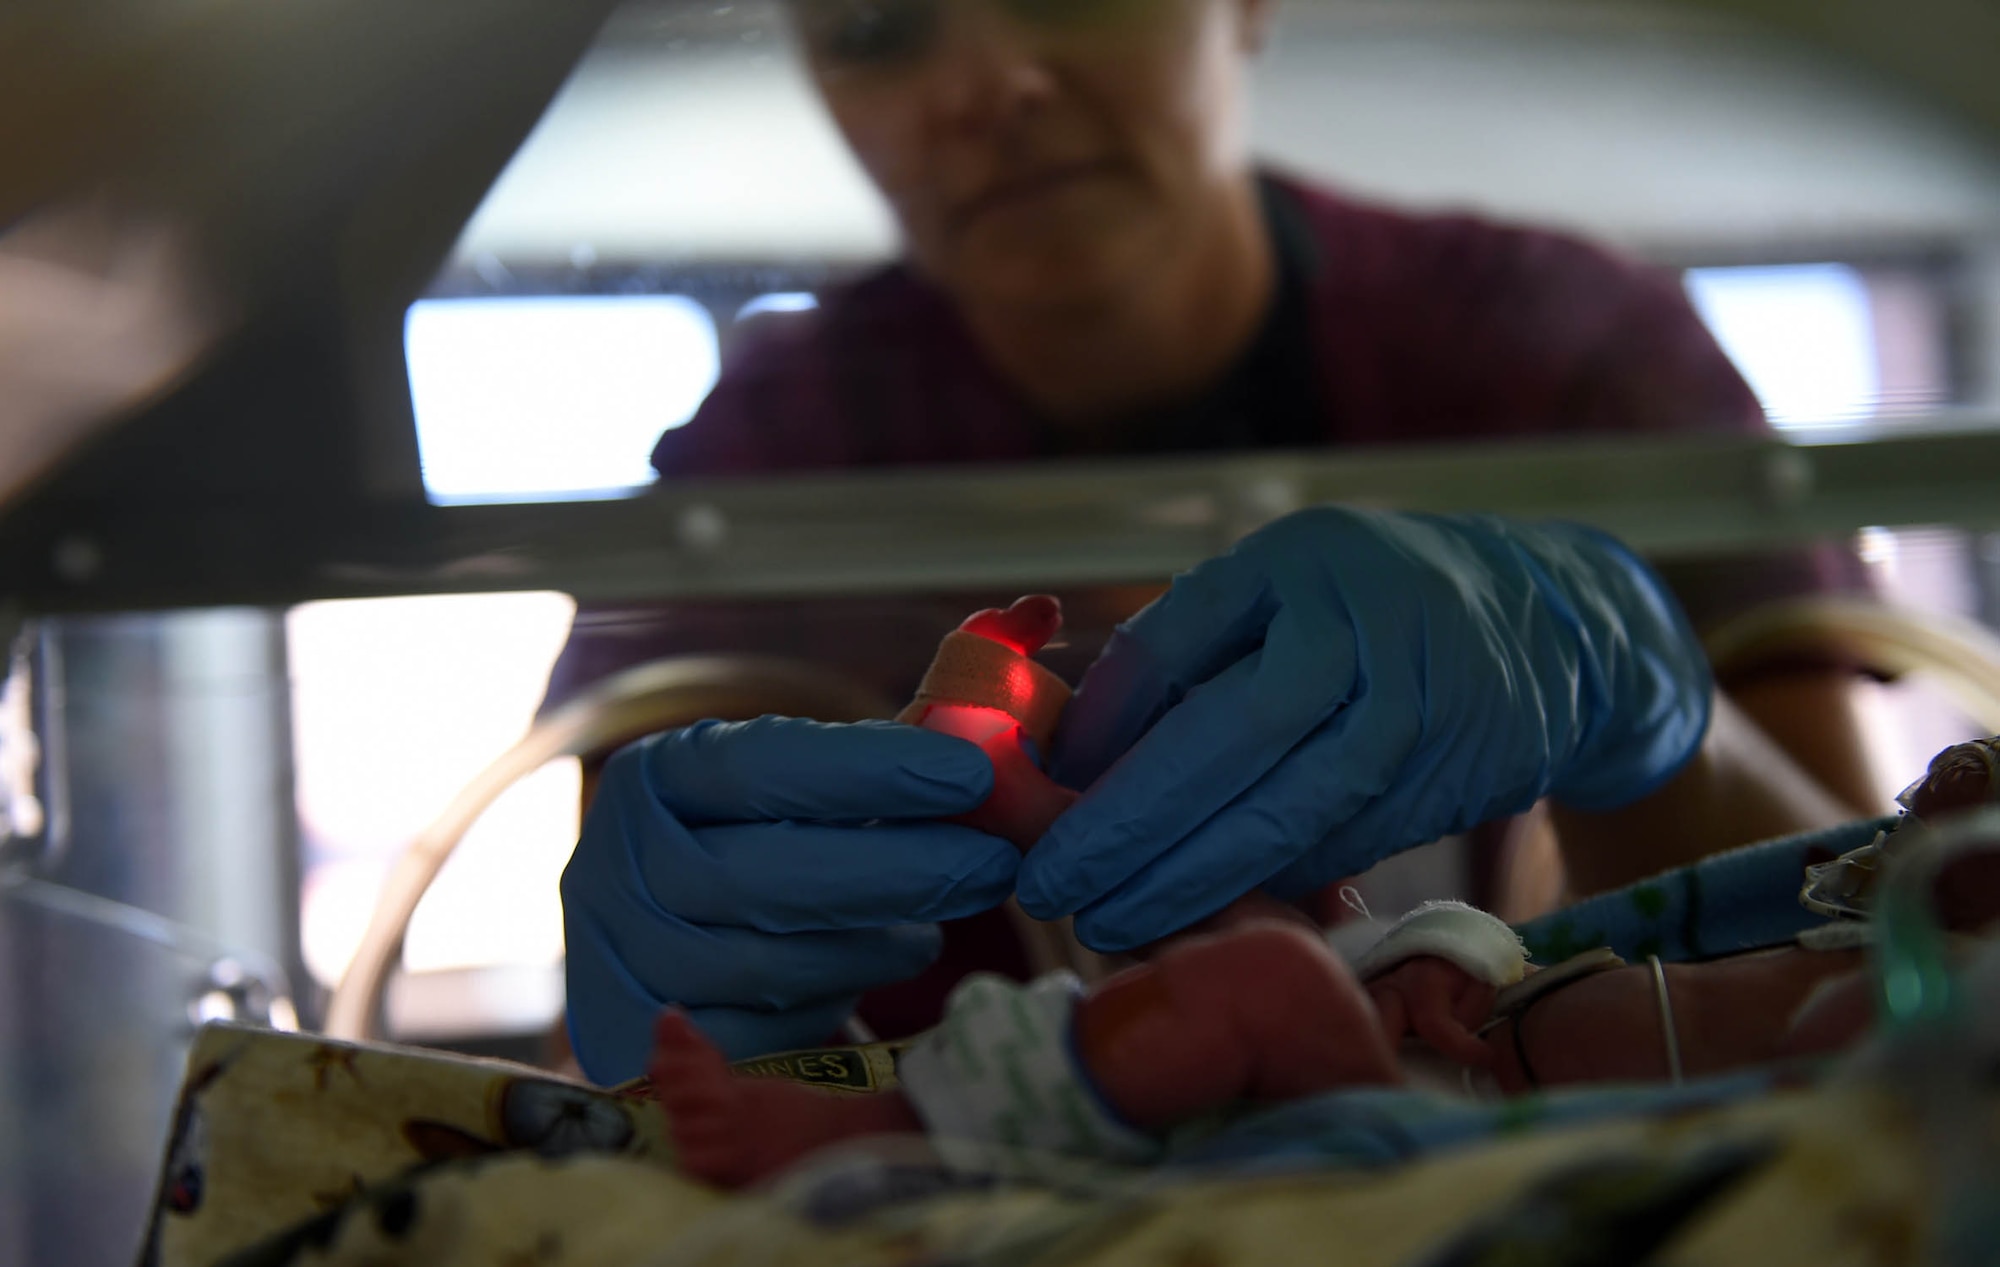 Capt. Mandie Yates, a registered nurse with the 959th Inpatient Operations Squadron, wraps an oxygen monitor around a baby’s foot Aug. 7, 2015, in the San Antonio Military Medical Center’s Neonatal Intensive Care Unit, Joint Base San Antonio-Fort Sam Houston. The NICU provides newborn health care and neonatal intensive care services to DoD beneficiaries while maintaining military readiness, education & training, and conducting research. (U.S. Air Force photo/Staff Sgt. Jerilyn Quintanilla)